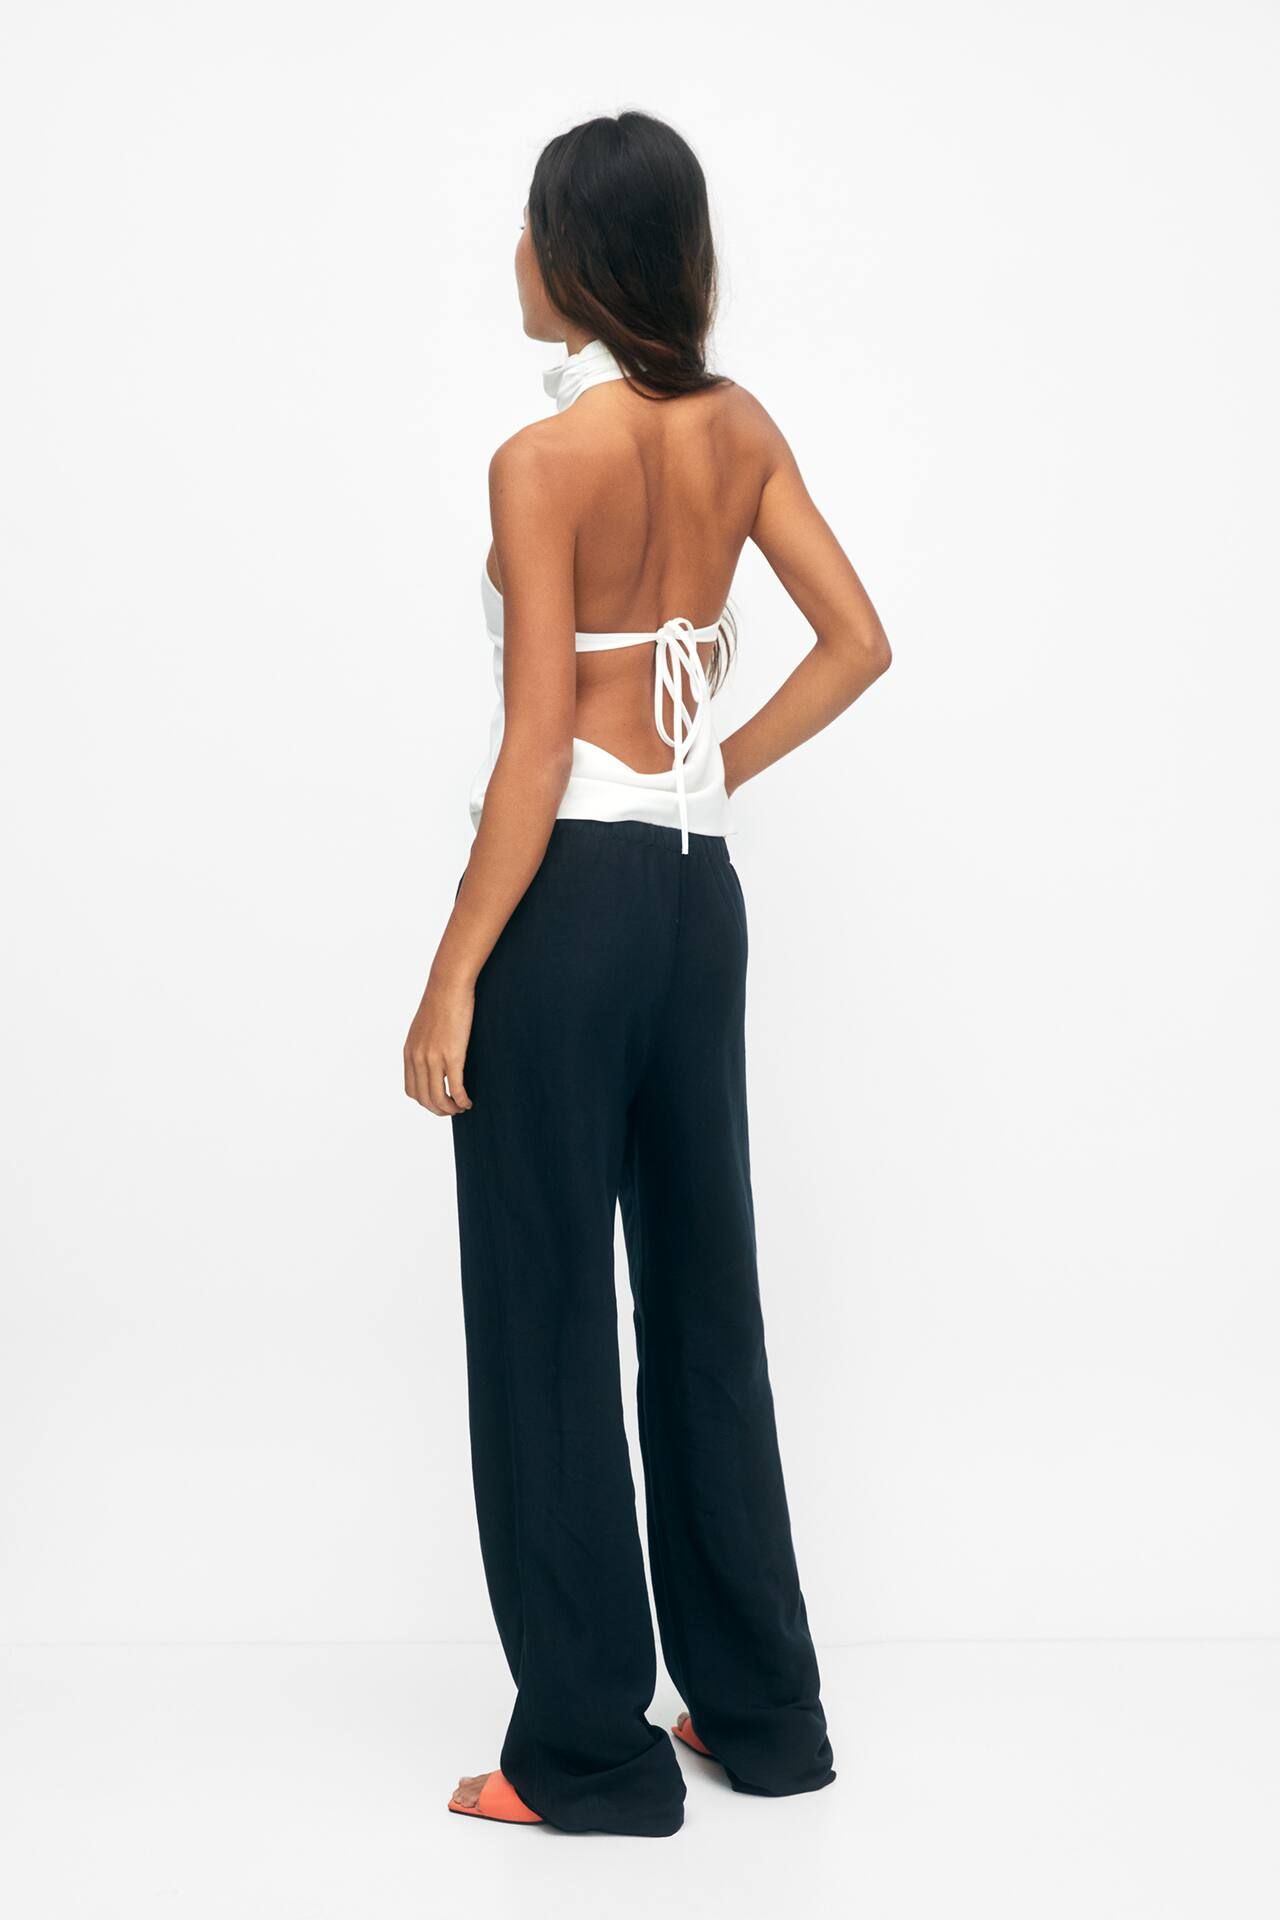 Open-back halter top | PULL and BEAR UK